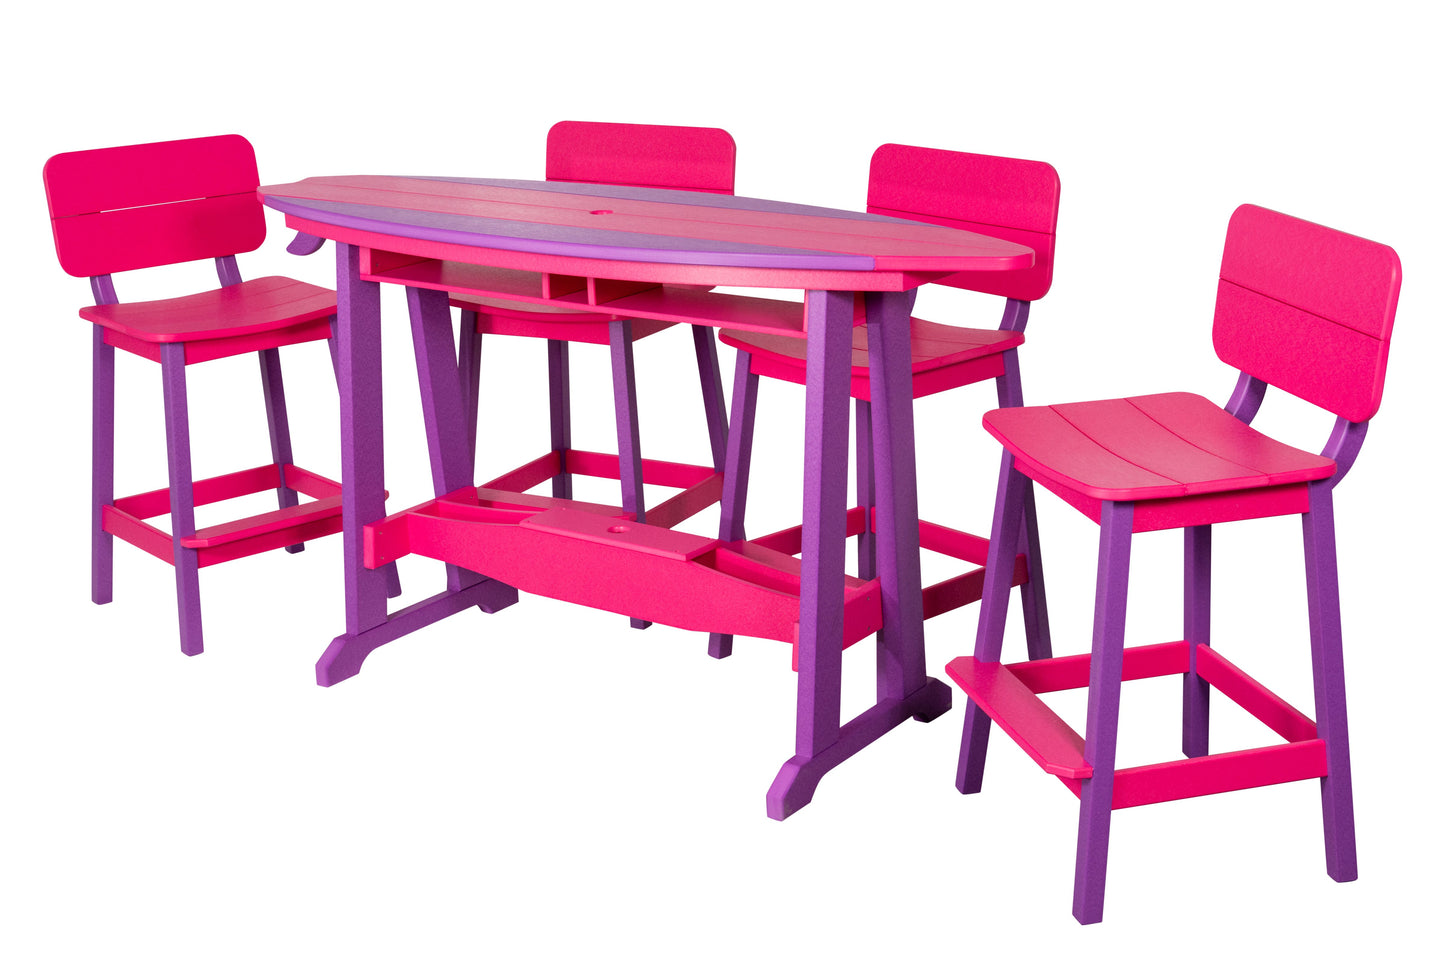 Beaver Dam Woodworks 6' SurfAira poly Surf Board Table and Chairs Purple and Pink